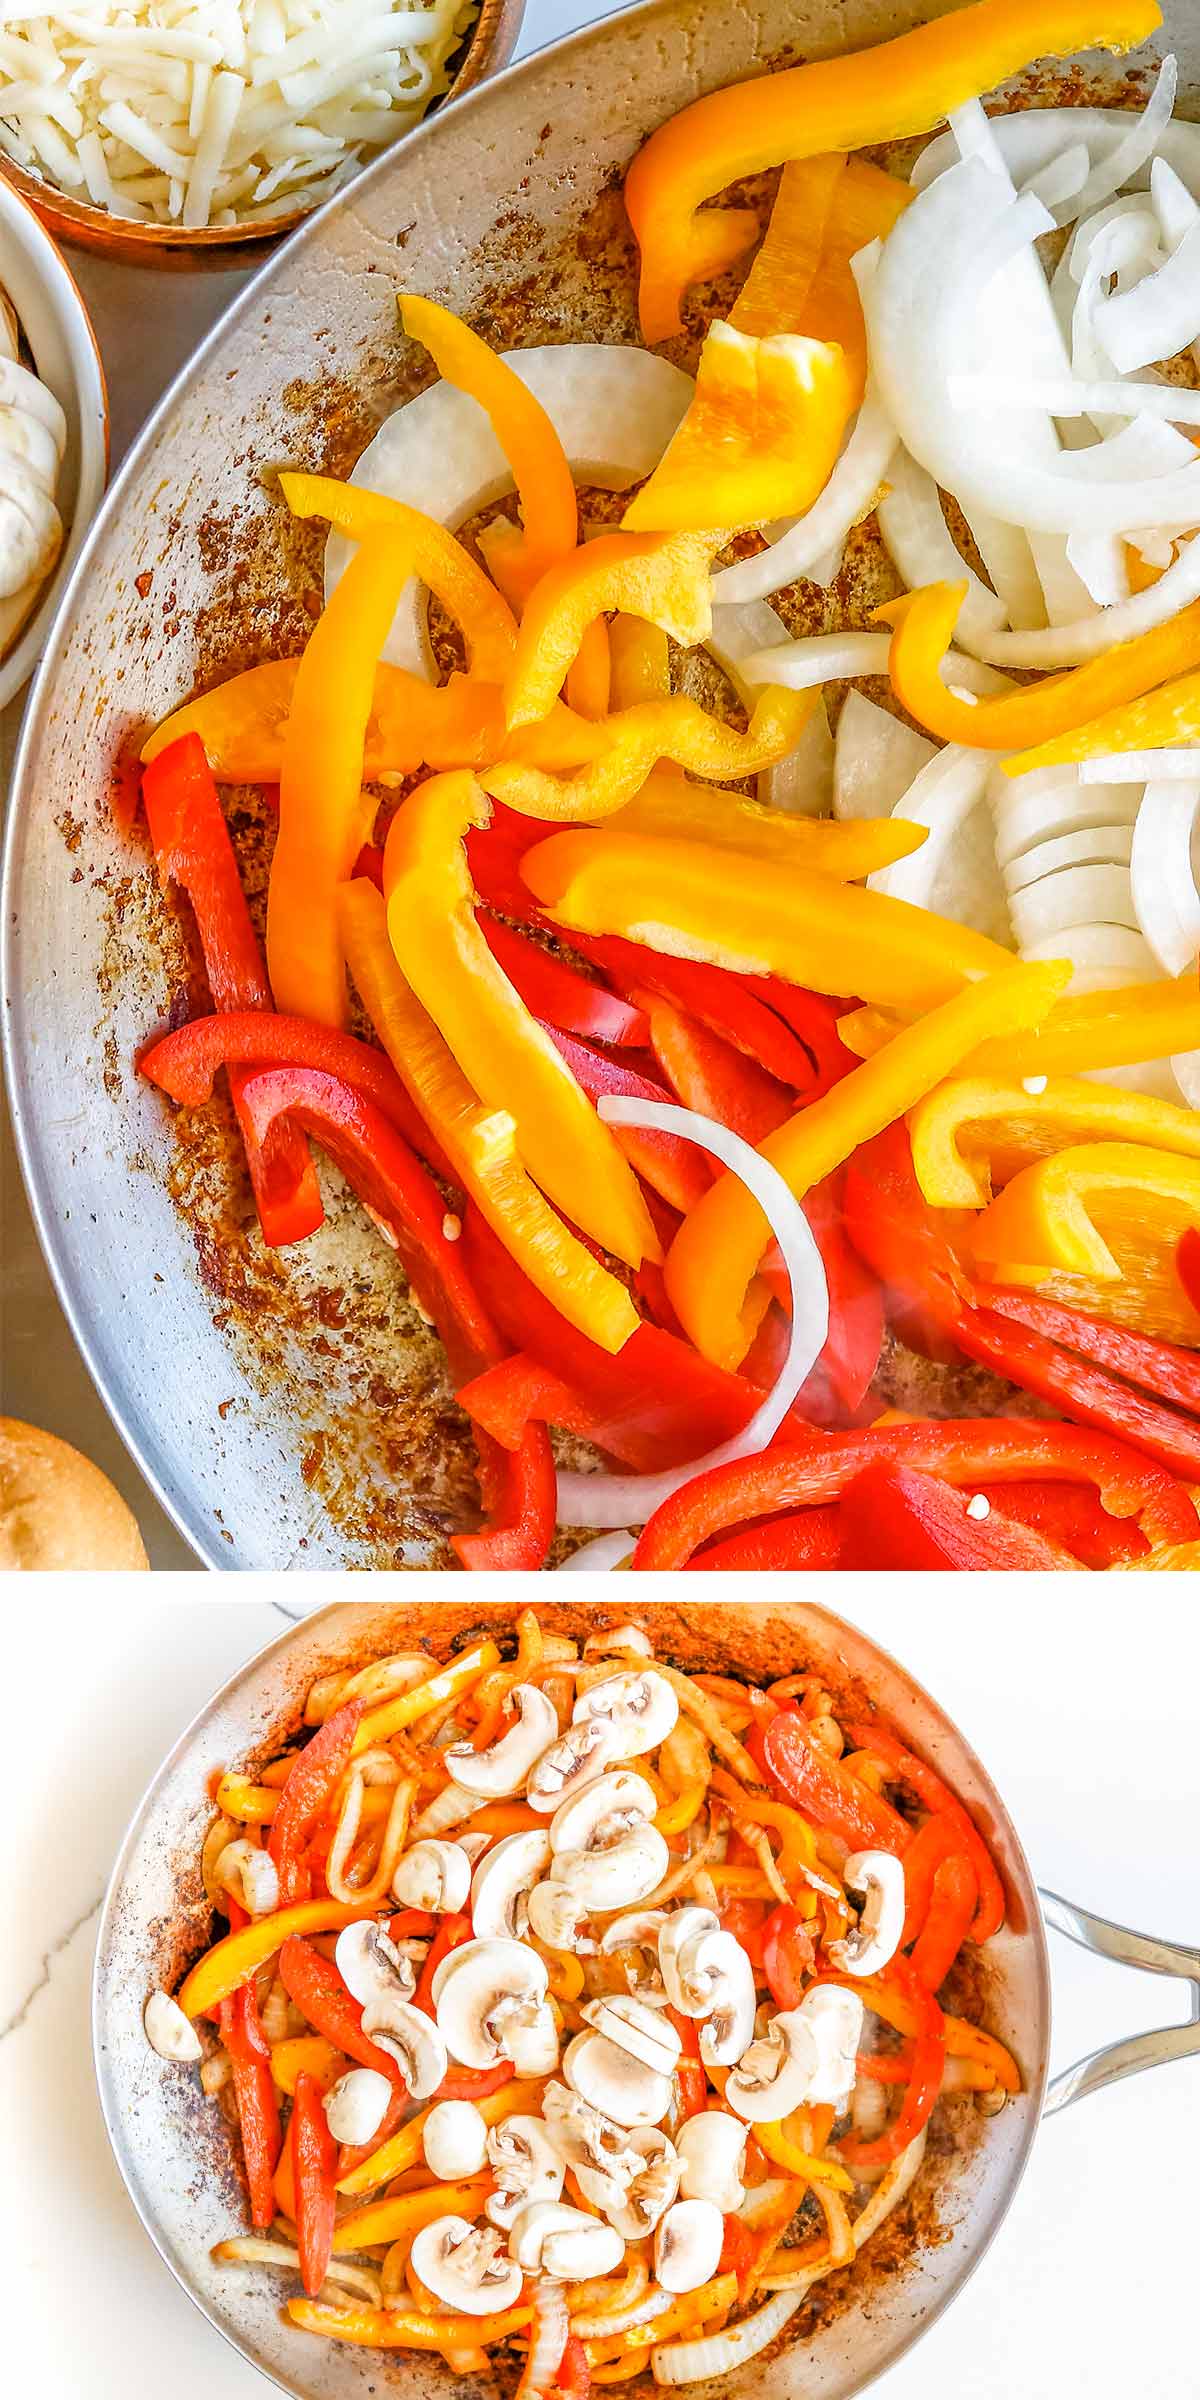 a well used skillet with sliced raw onions and uncooked slices of red and yellow bell peppers along with mushrooms.